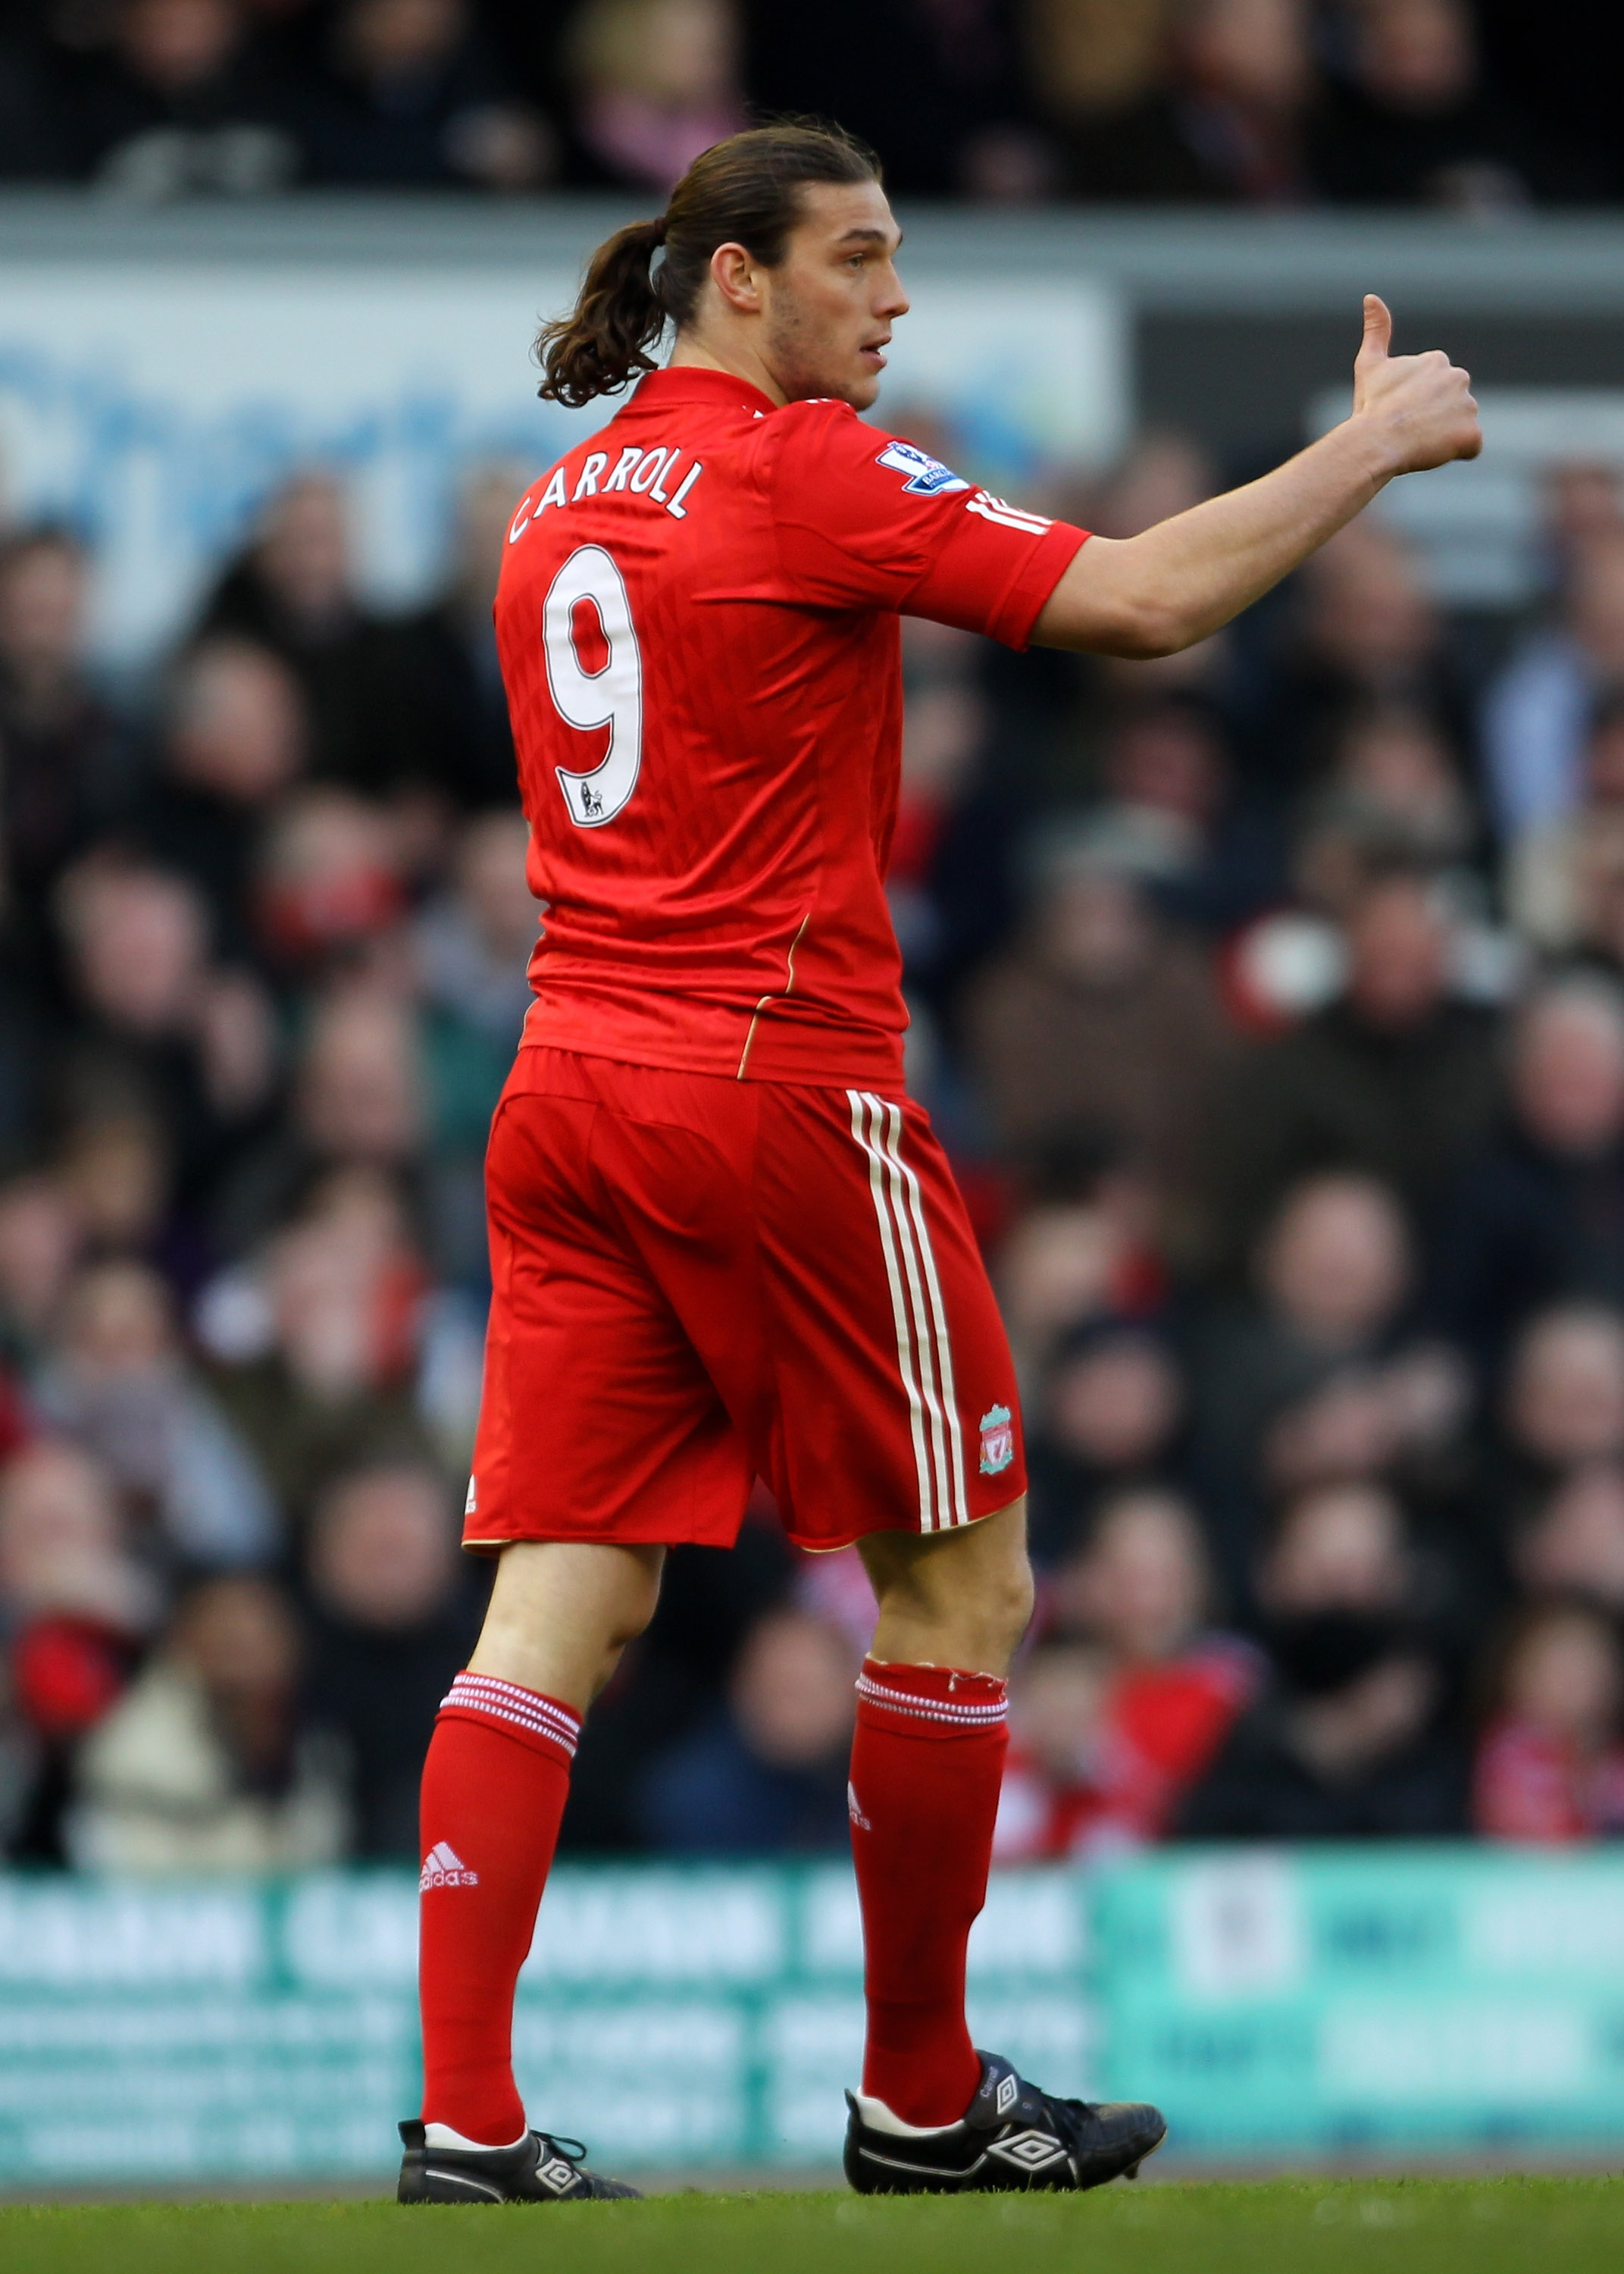 LIVERPOOL, ENGLAND - MARCH 06:  Andy Carroll of Liverpool gestures after coming on as a substitute to make his debut during the Barclays Premier League match between Liverpool and Manchester United at Anfield on March 6, 2011 in Liverpool, England.  (Phot